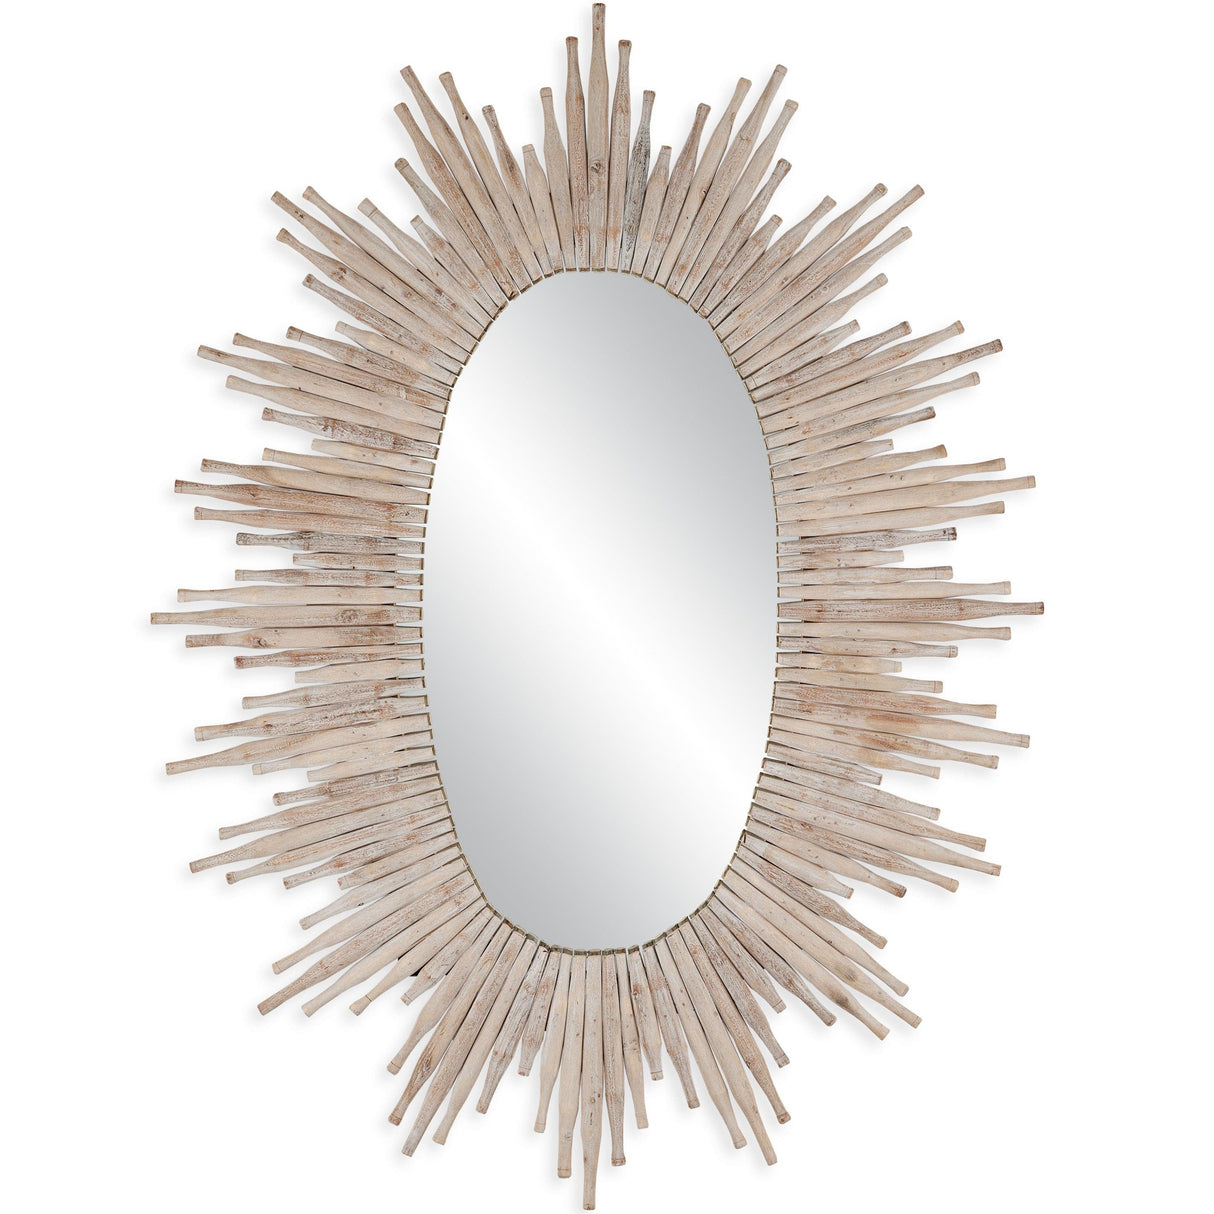 Currey and Company Chadee Oval Mirror Mirrors currey-co-1000-0118